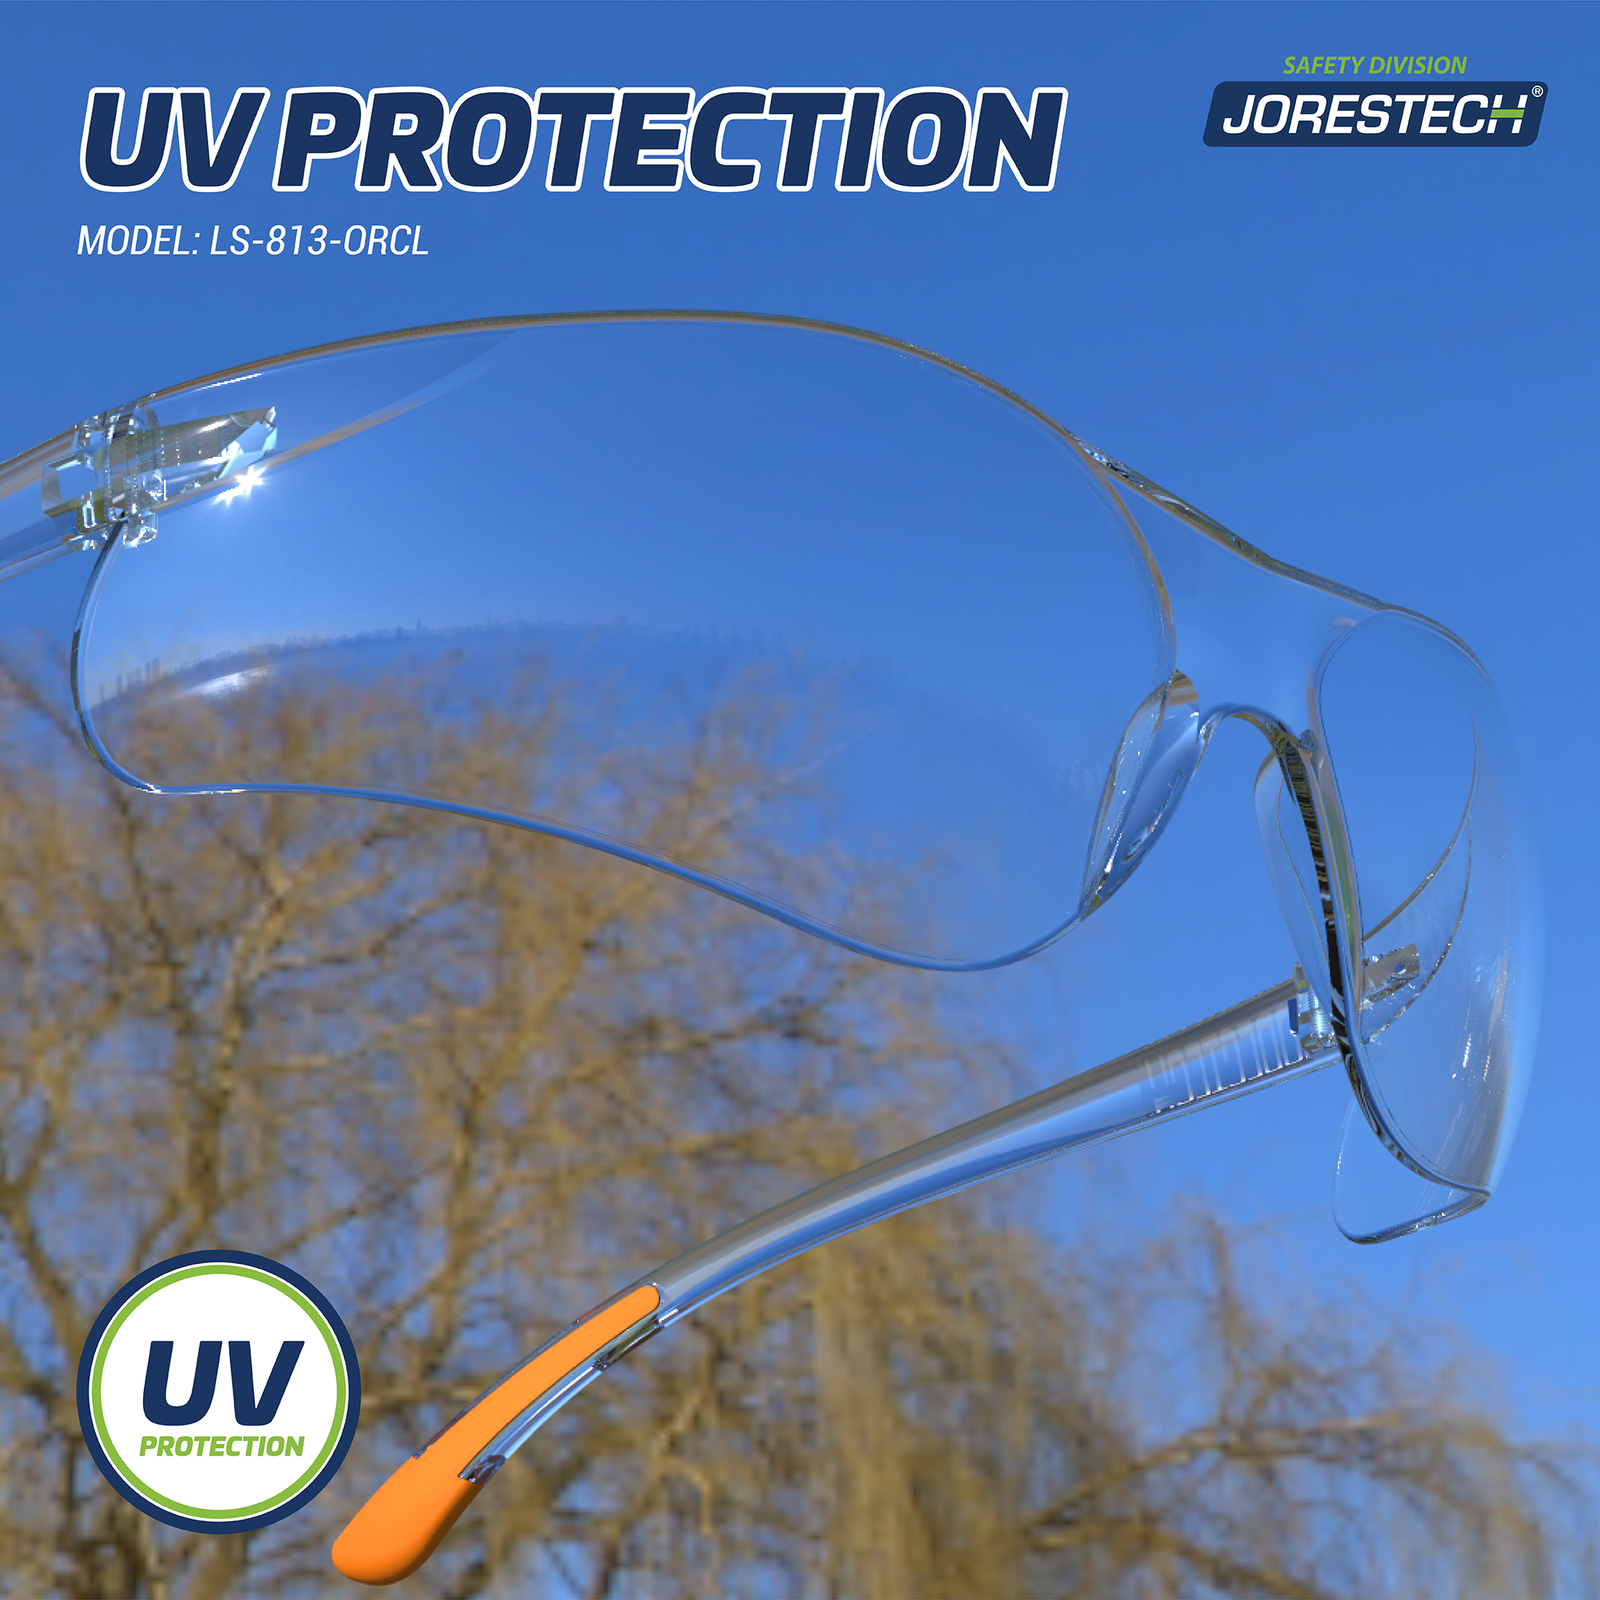 Close up view of the clear High impact Jorestech Safety glasses with a background of a blue sky and tree branches. Text Reads: UV protection, model S-LS-813-ORCL 